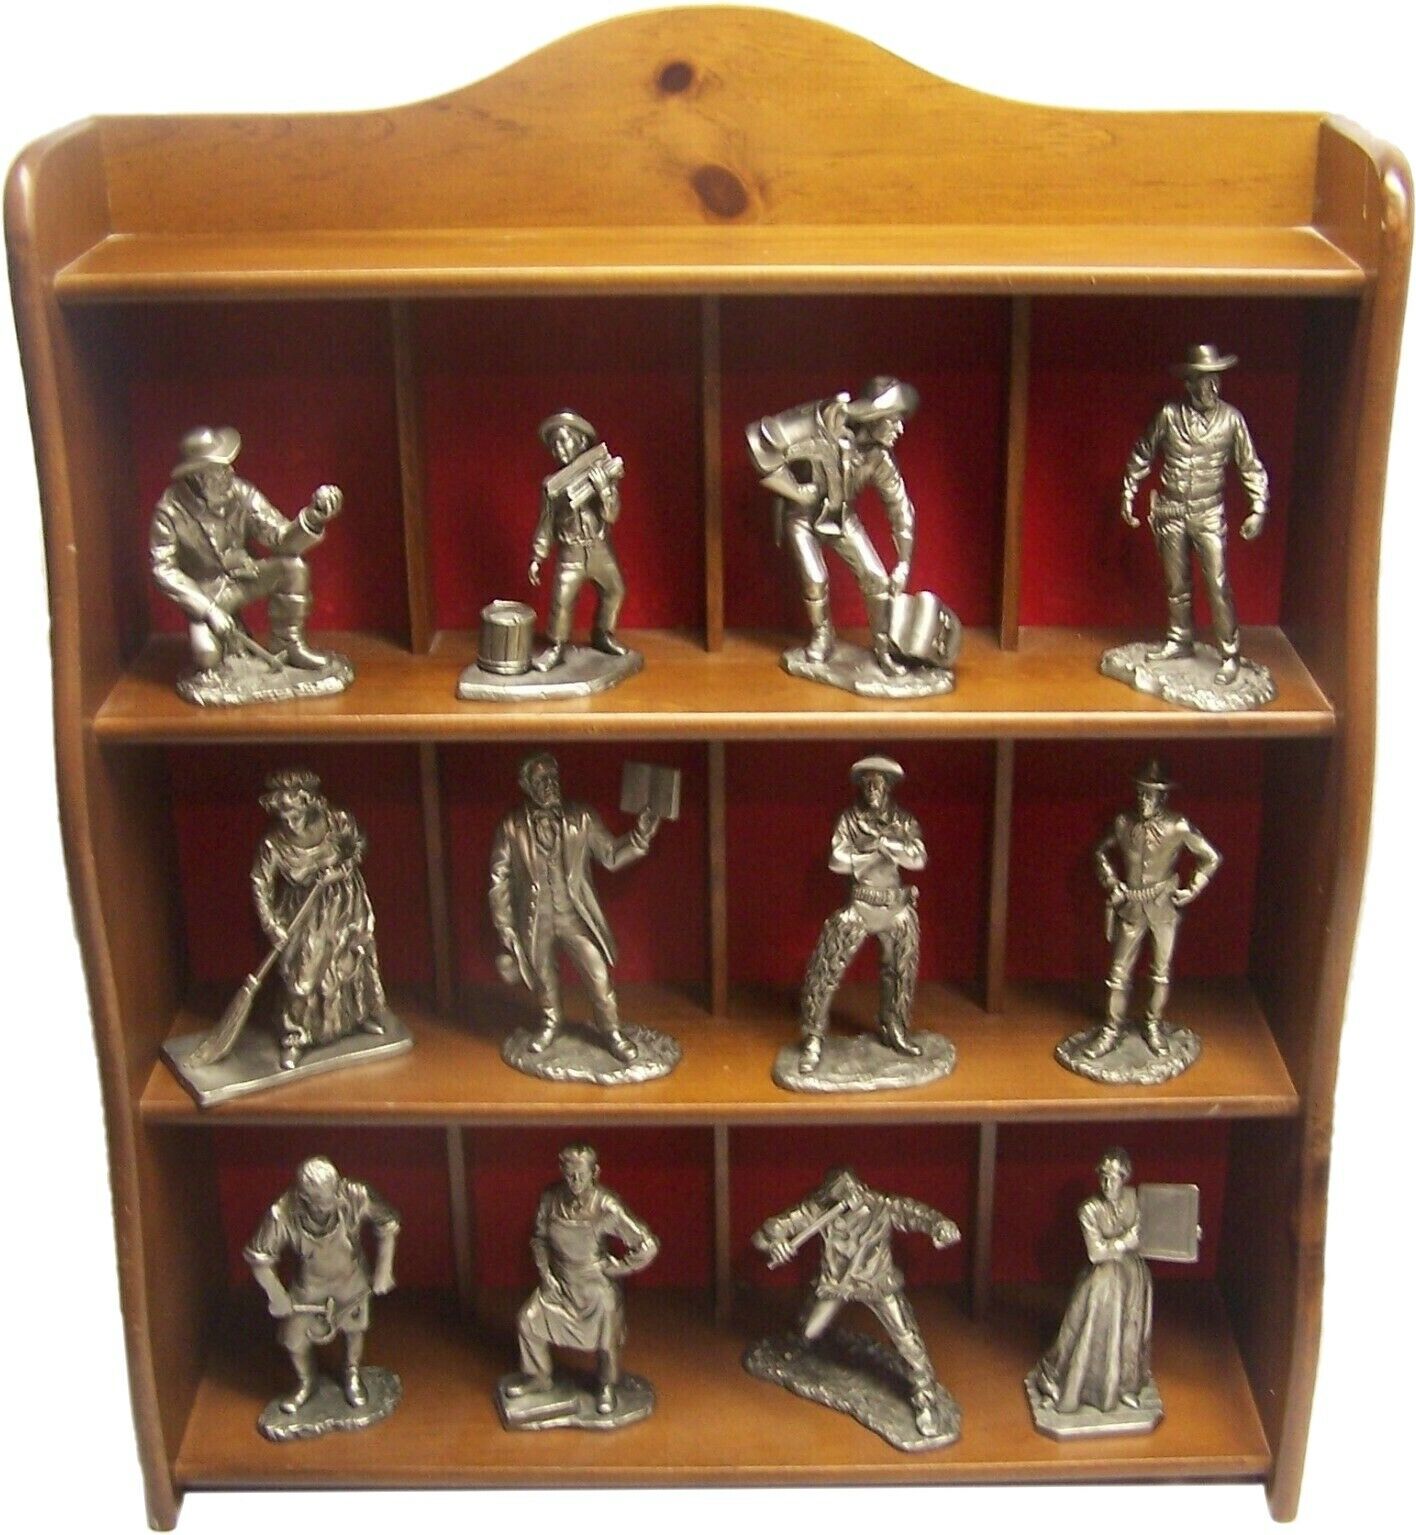 12 Pewter American Sculpture Society Figures With Wall Mount Wood Display - Nice